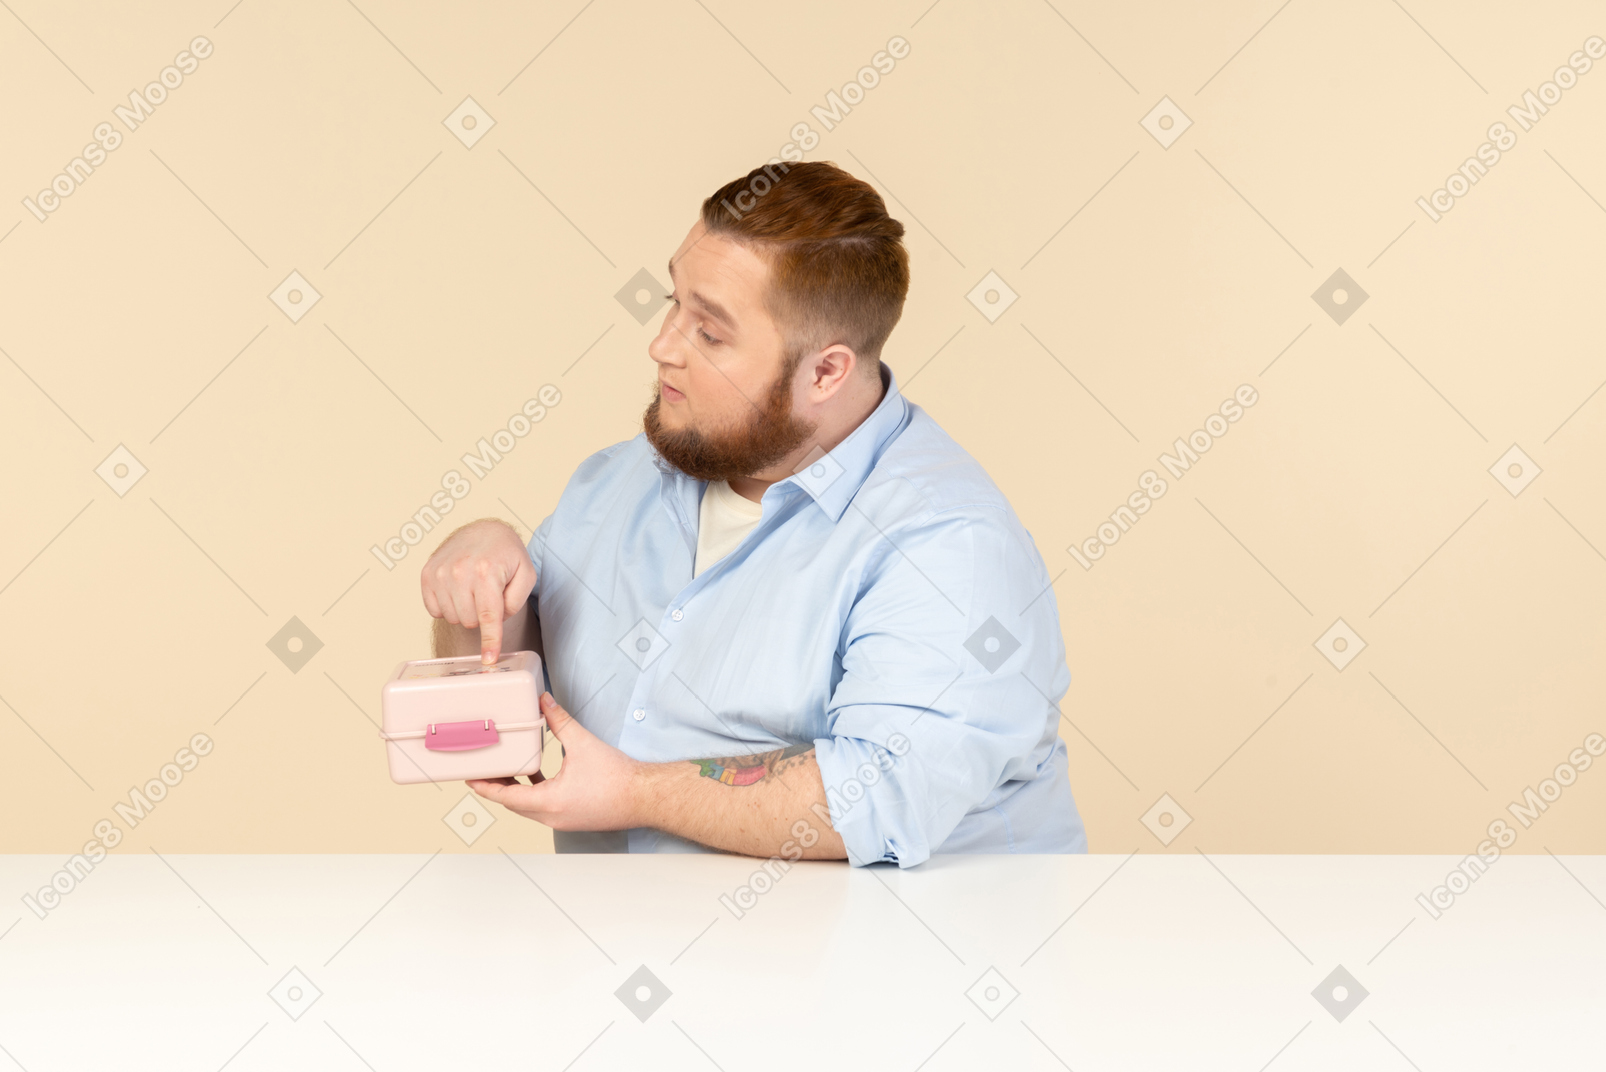 Big man sitting at the table and holding lunchbox